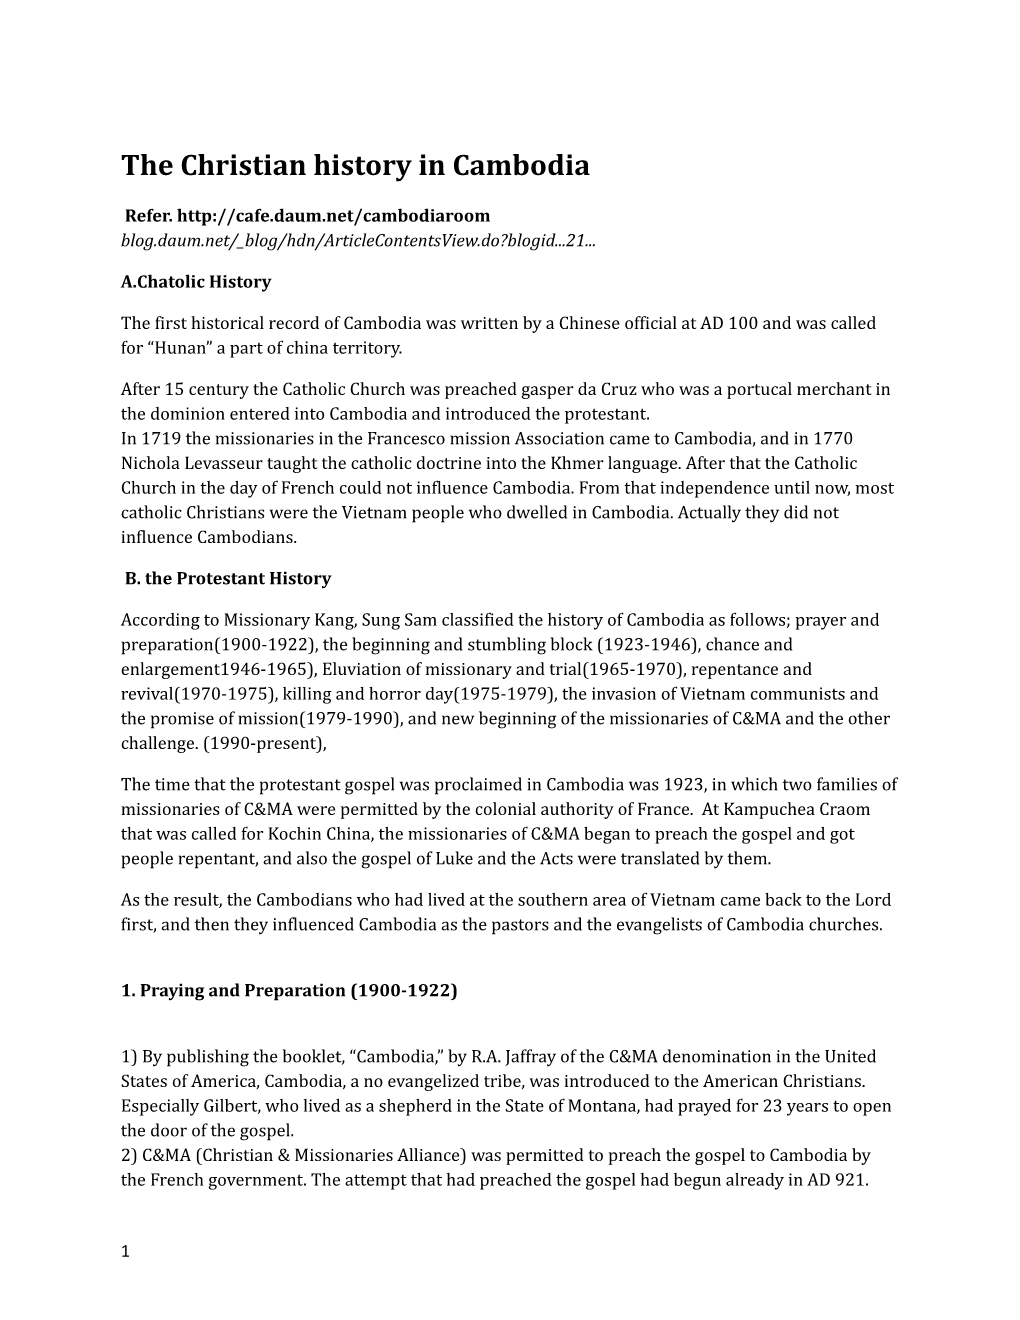 The Christian History in Cambodia